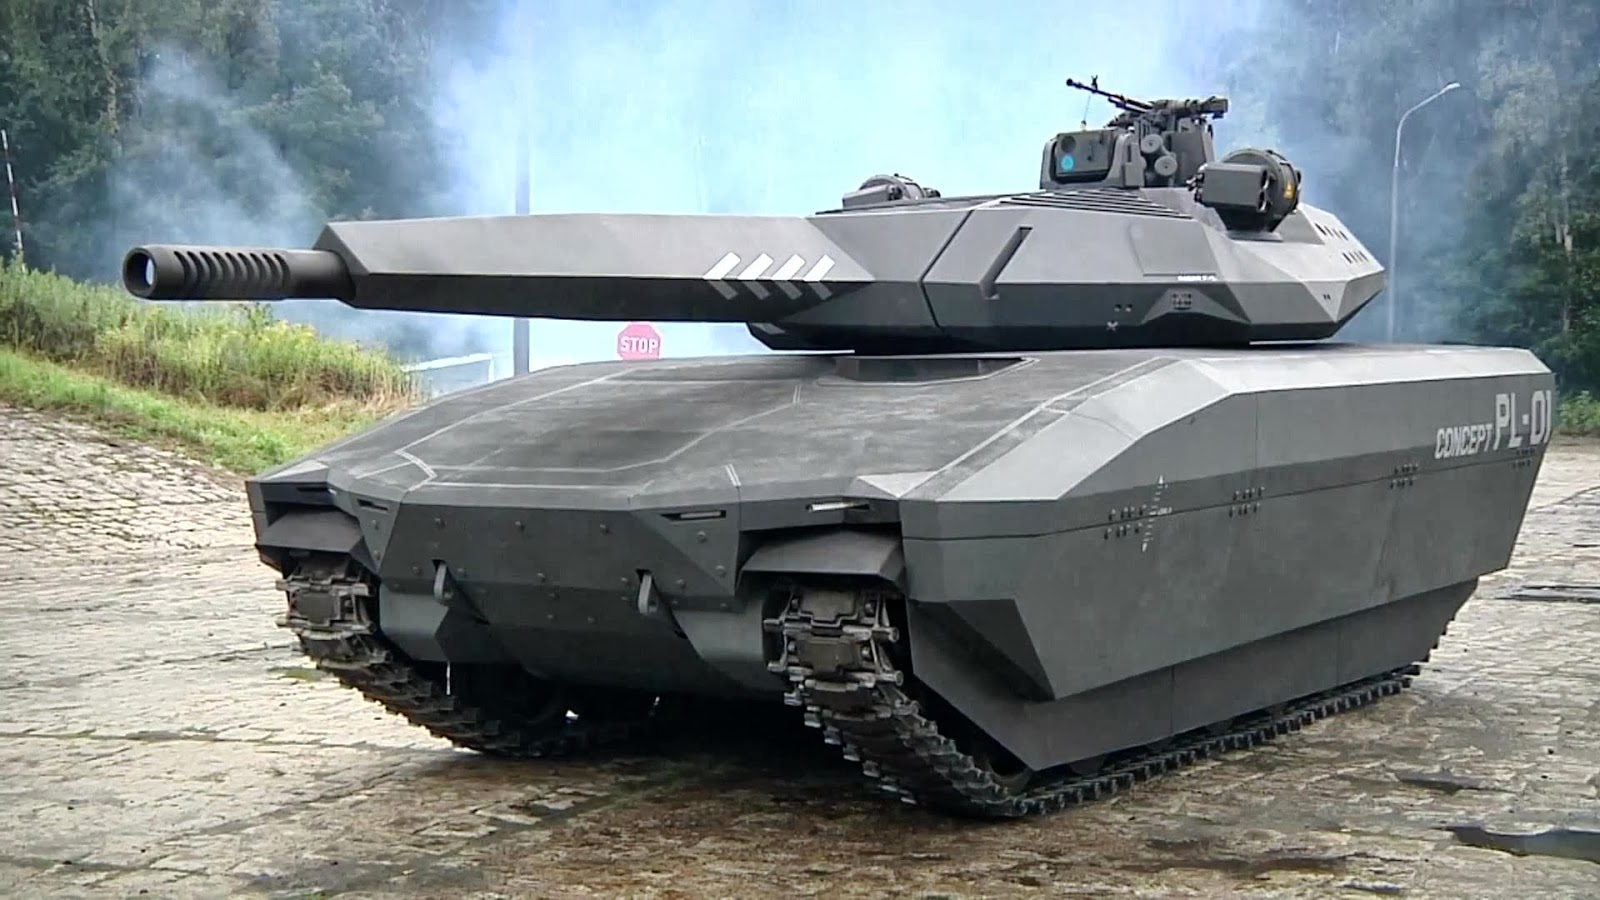 The Polish Obrum PL-01 Concept, set to enter mass production in 2018.